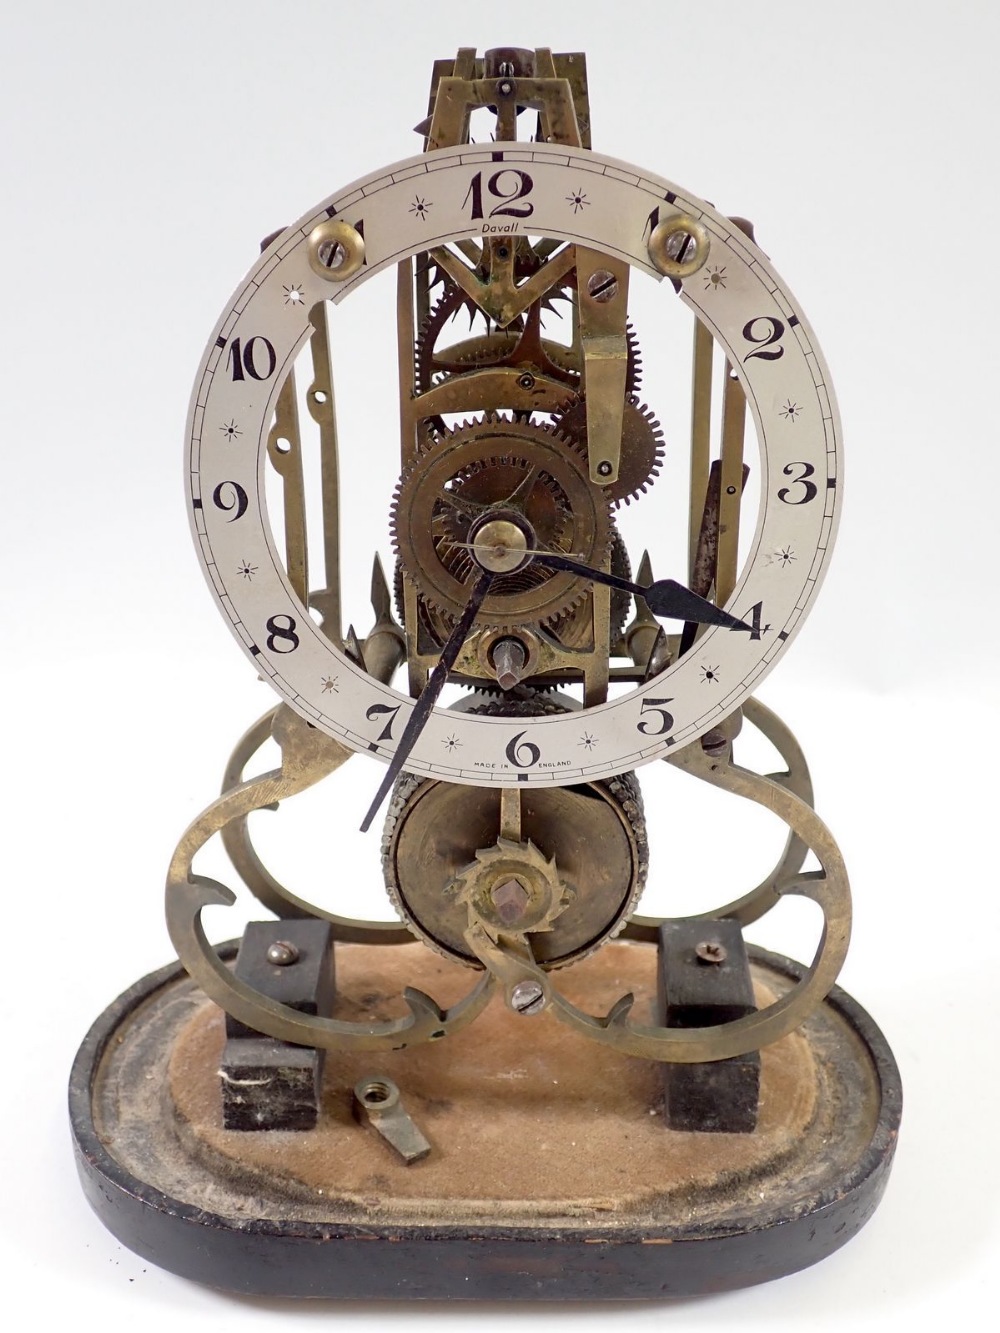 A Davall English made skeleton clock under glass dome - Image 2 of 4